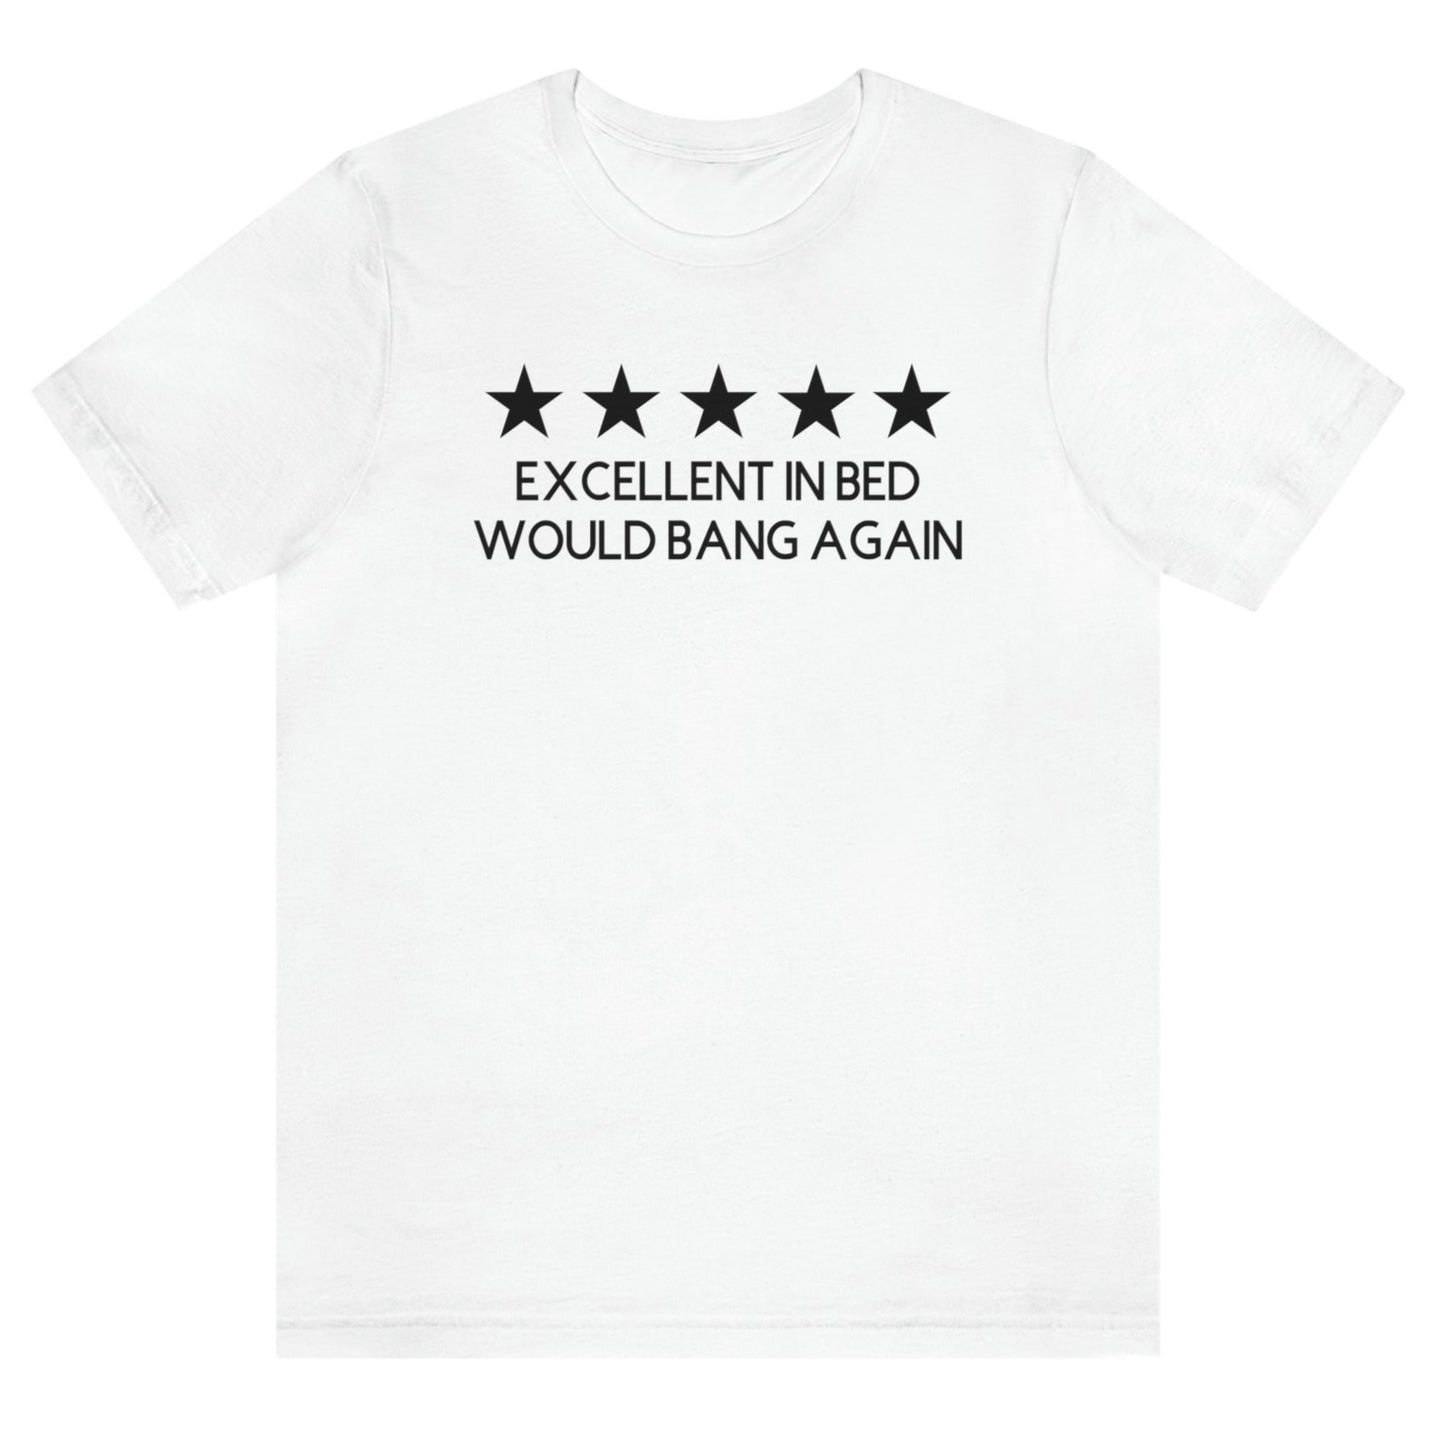 excellent-in-bed-would-bang-again-five-stars-white-t-shirt-funny